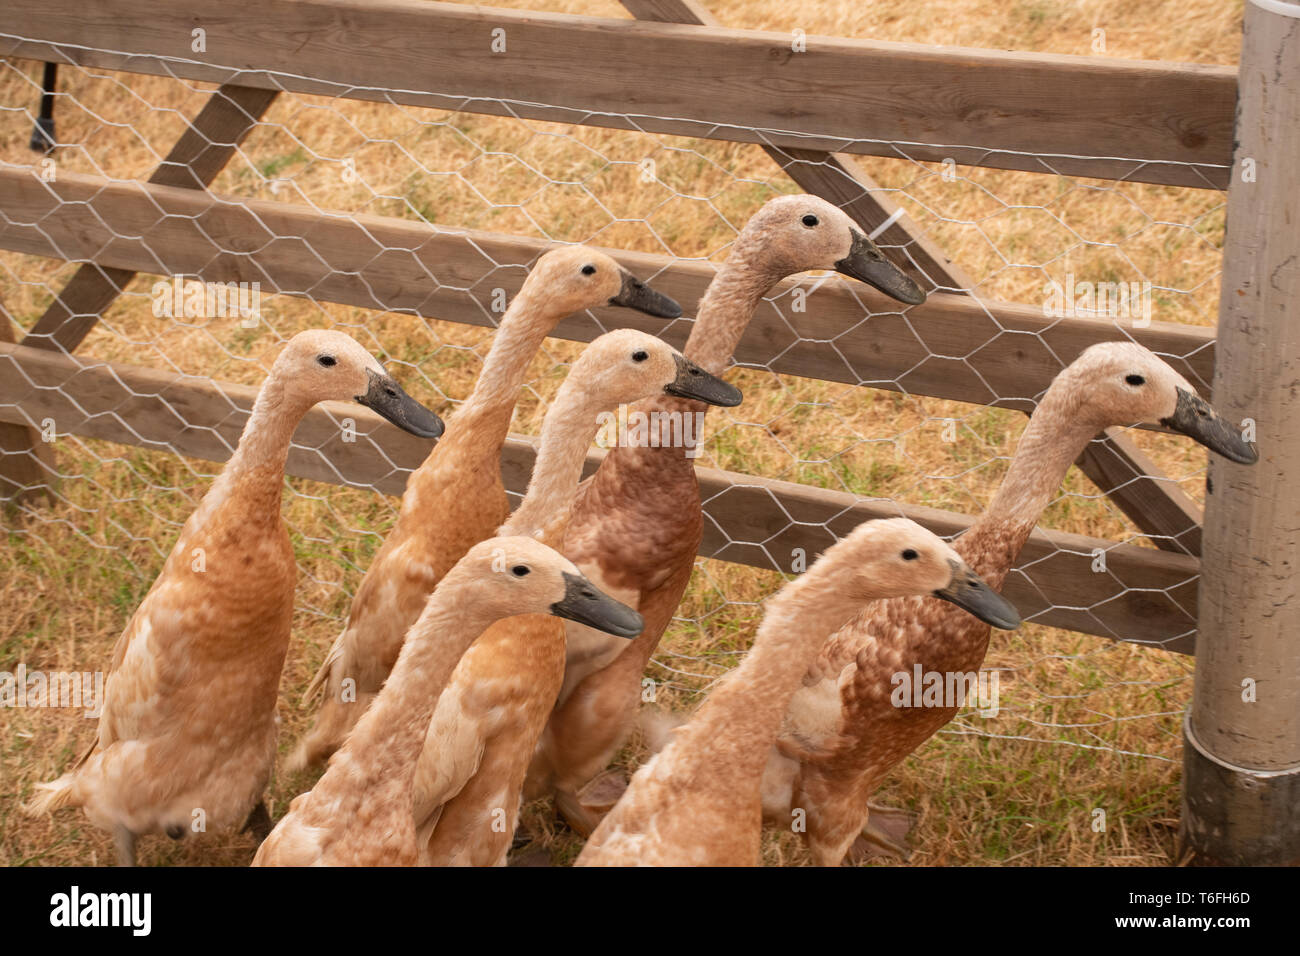 Baby geese in pen Stock Photo